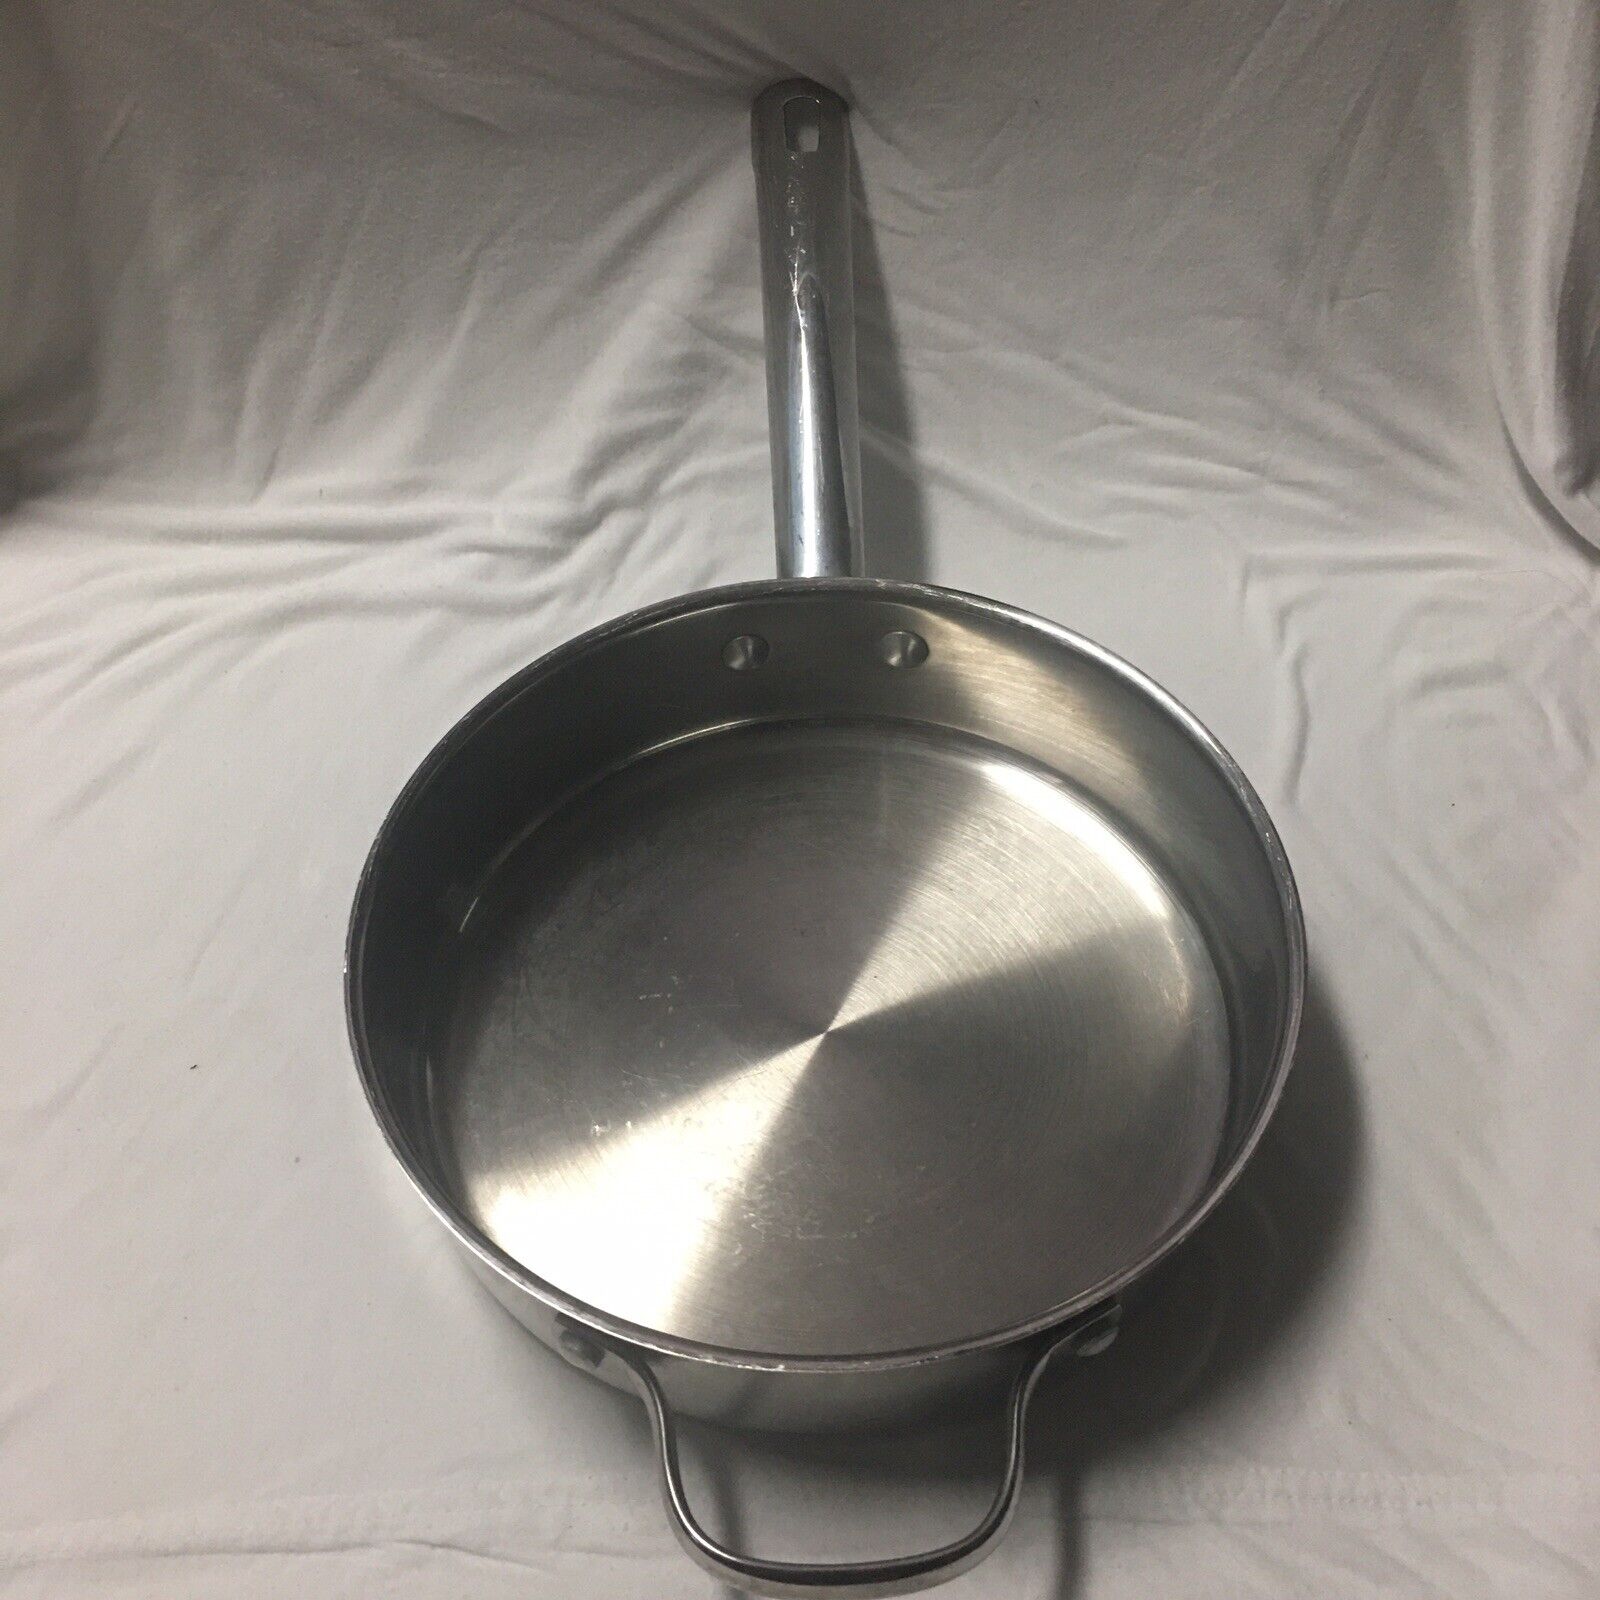 Wolfgang Puck Cookware 10 Inch Chicken Fryer 18-10 Stainless Steel Skillet  0308